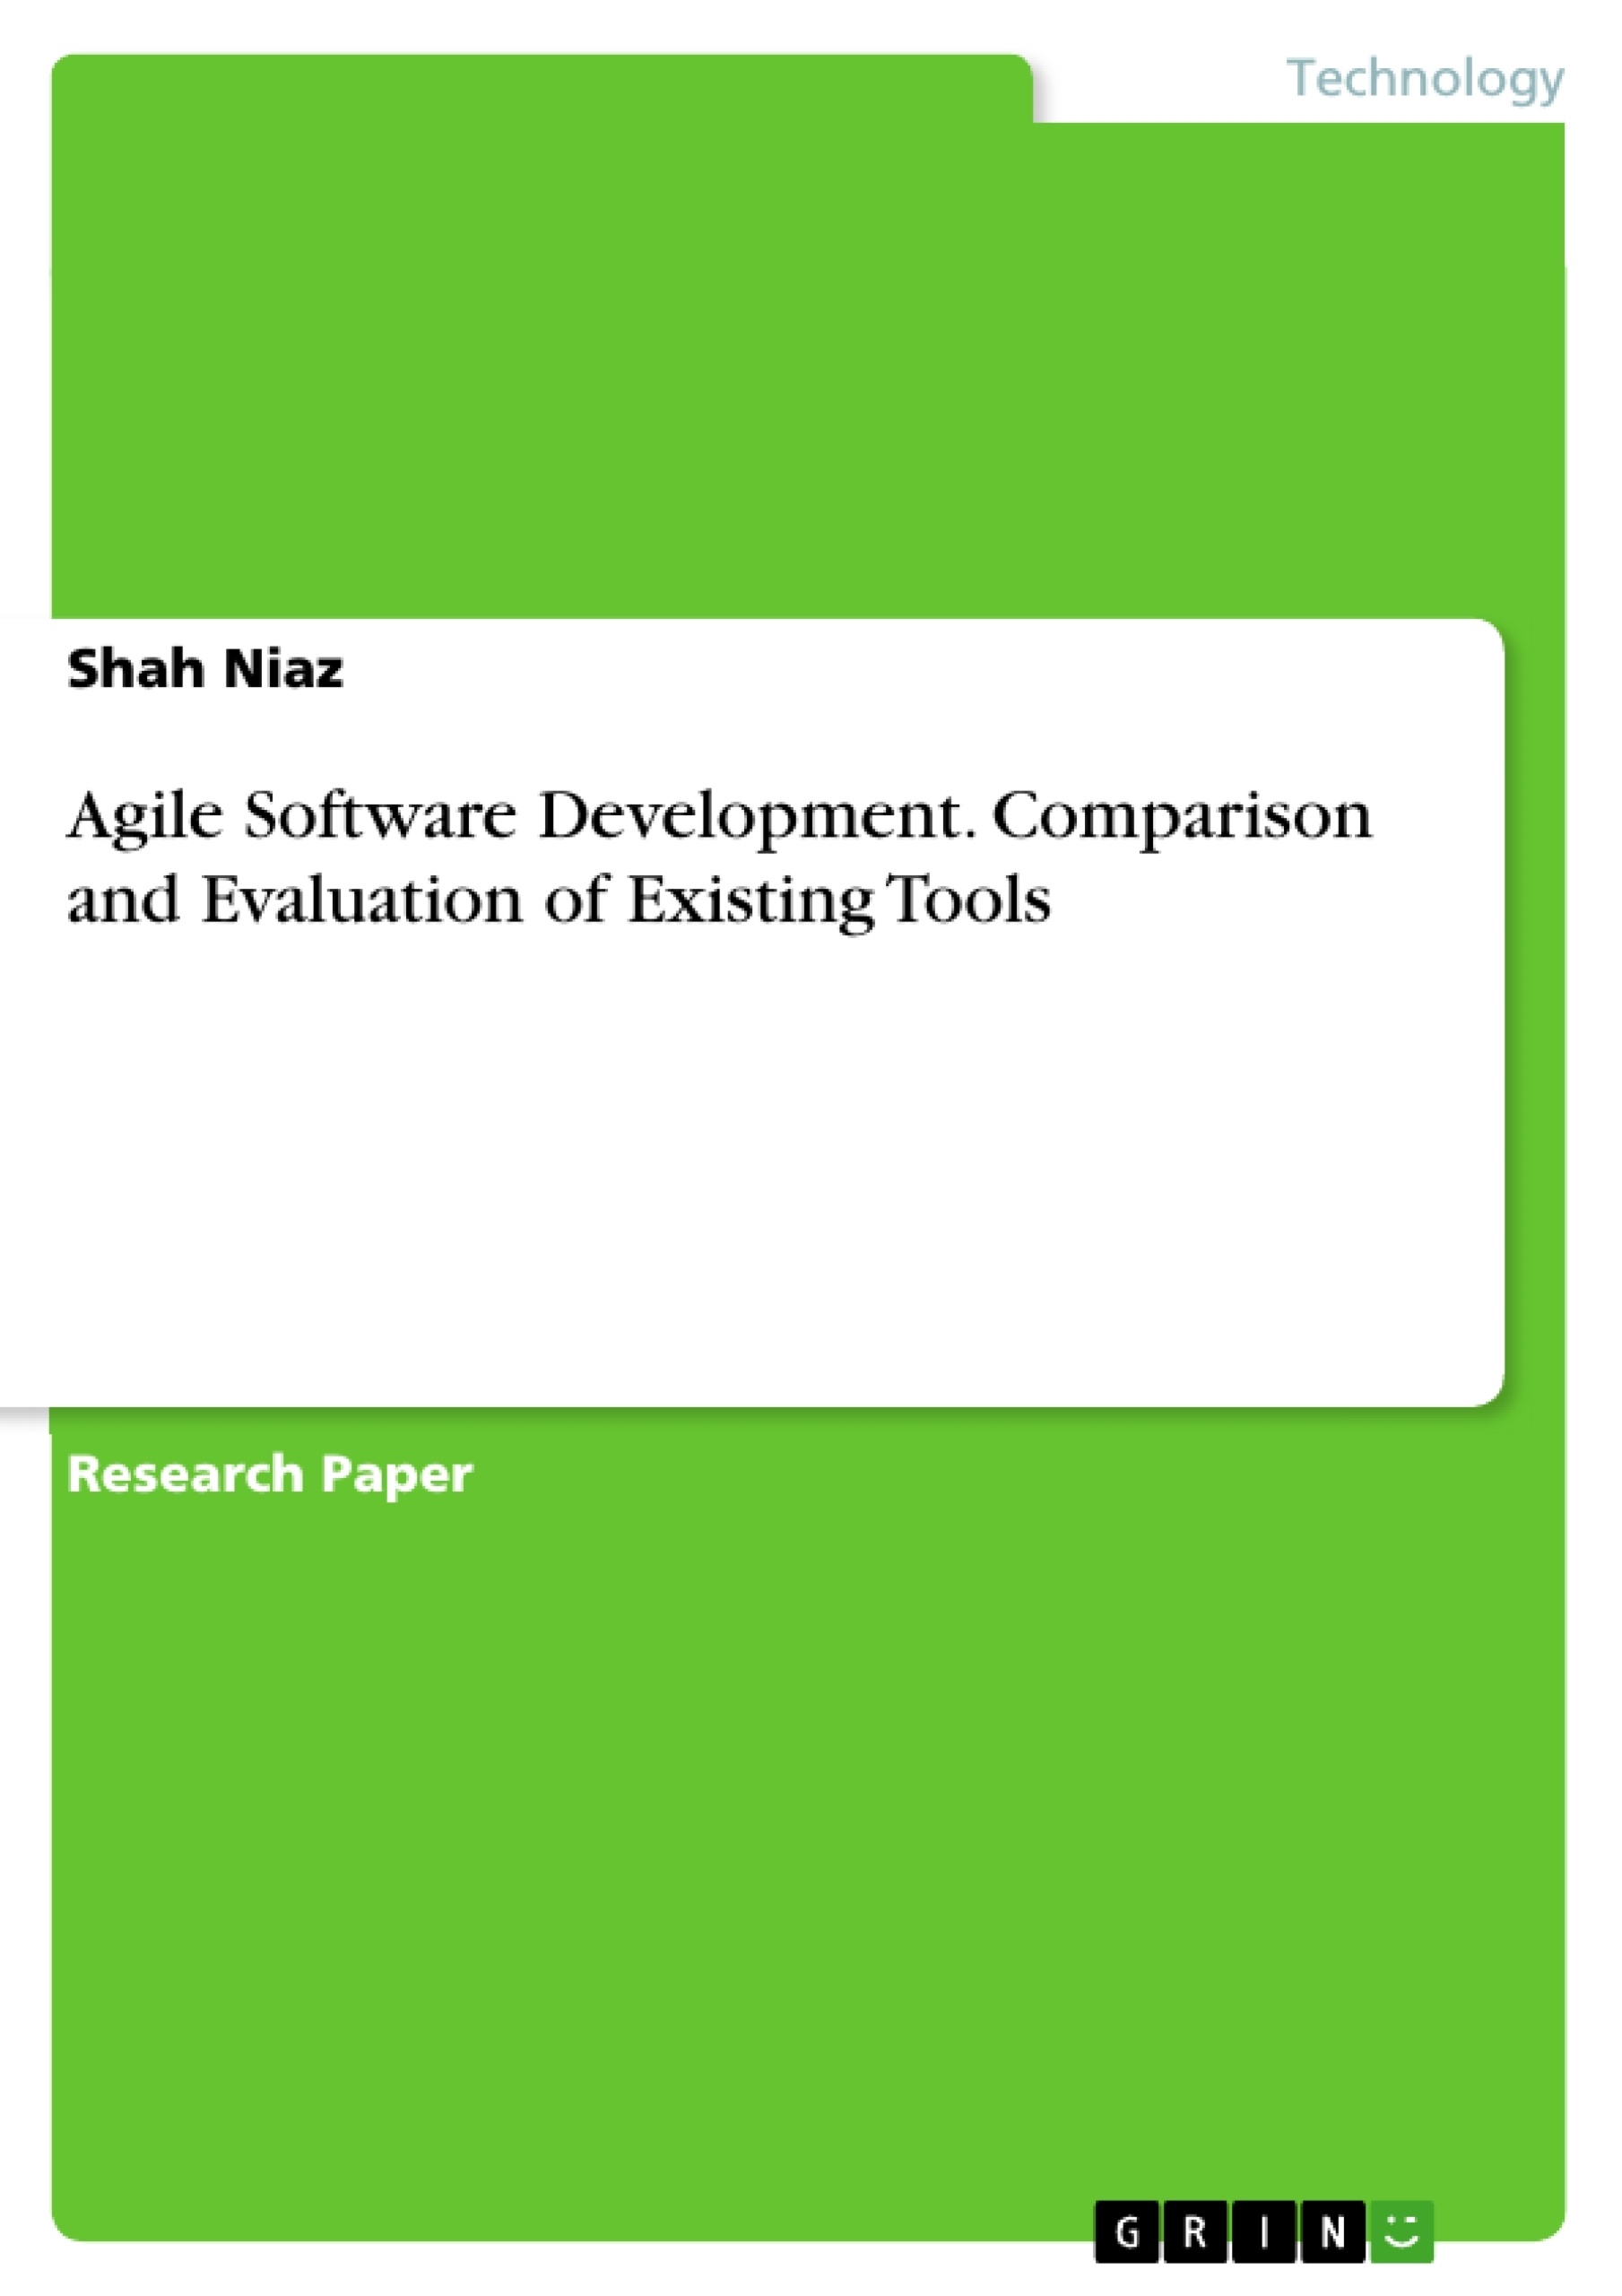 Title: Agile Software Development. Comparison and Evaluation of Existing Tools